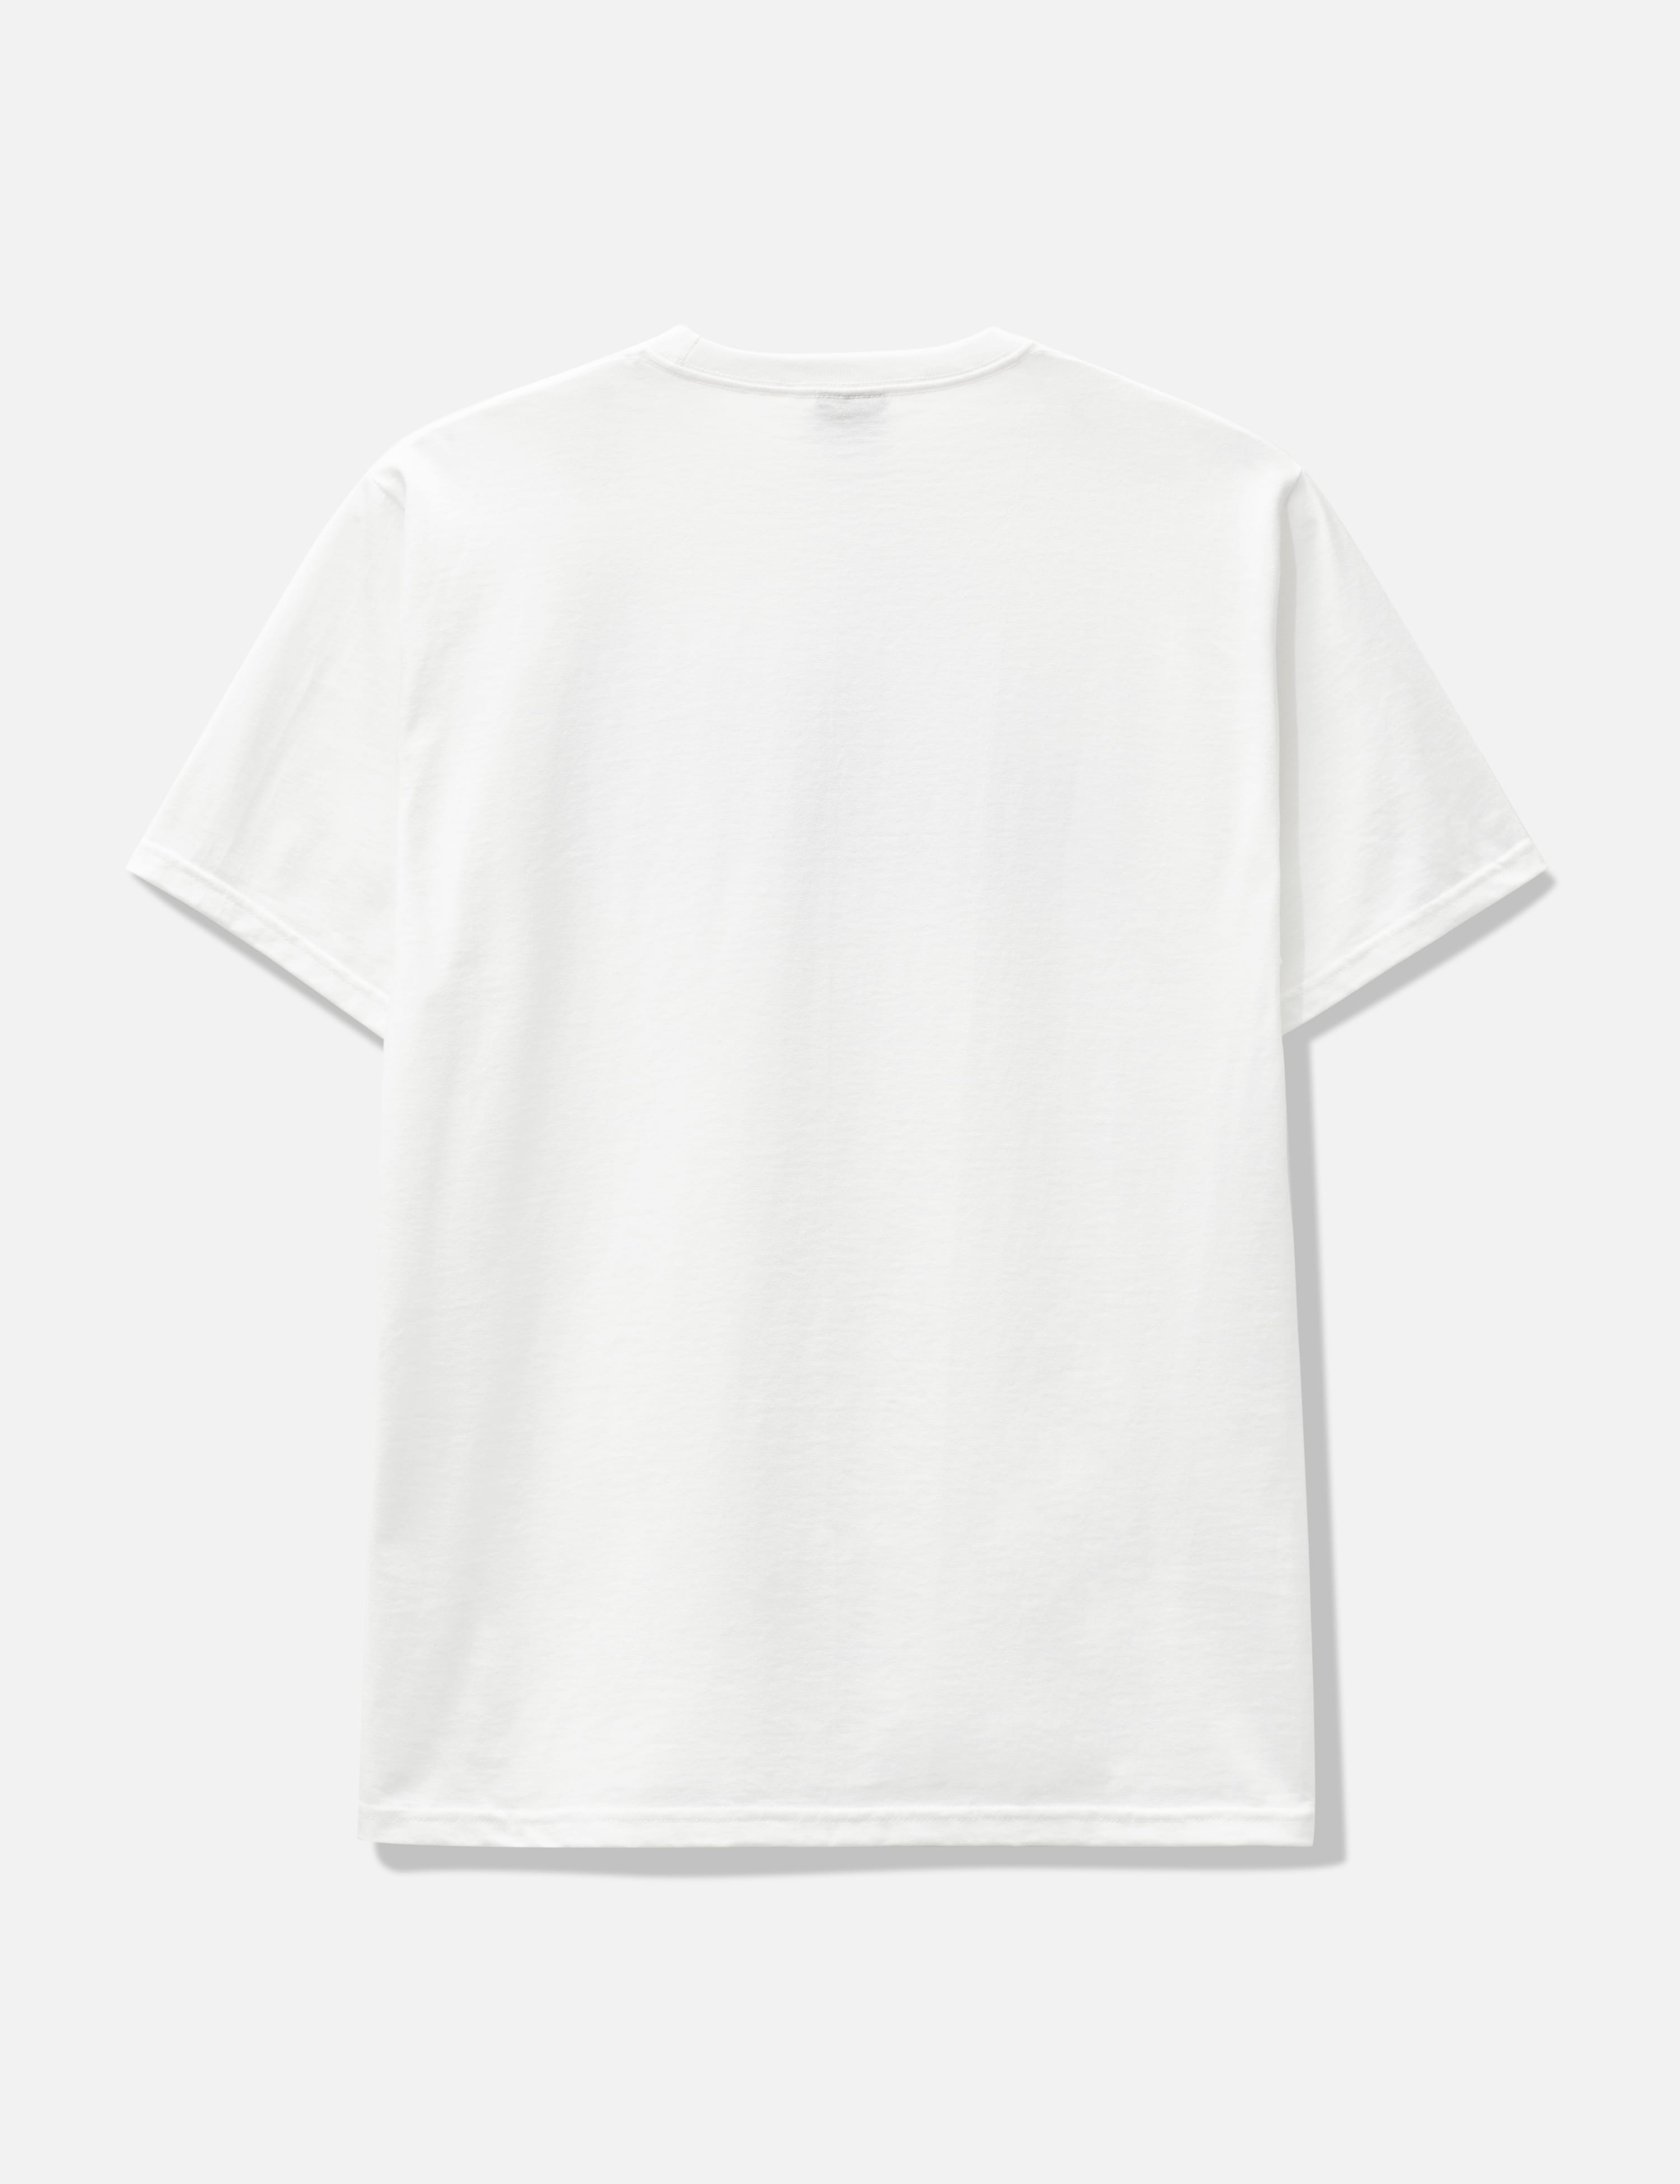 Stüssy - Race Car T-shirt | HBX - Globally Curated Fashion and